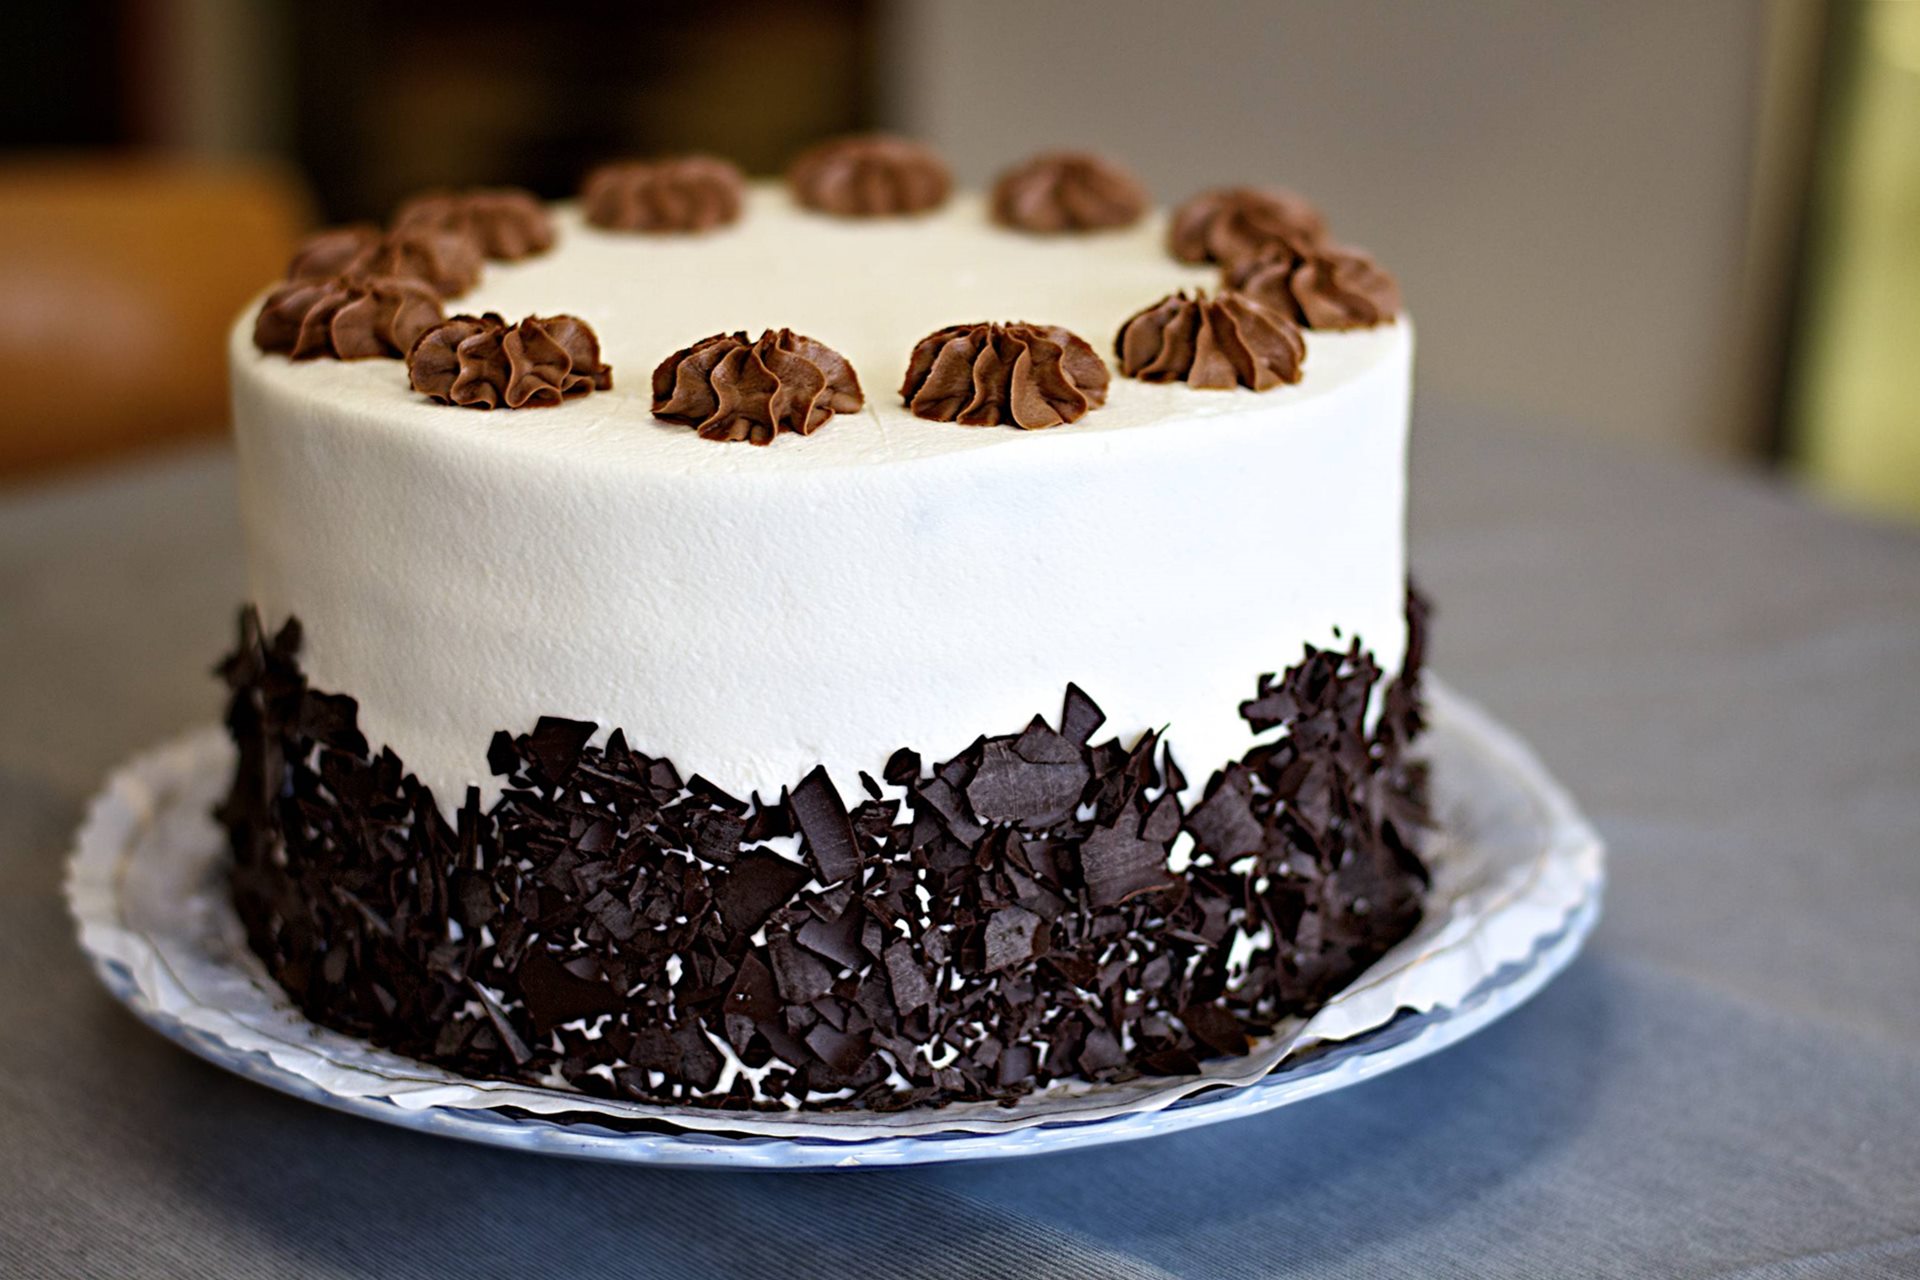 Cake Images Hd